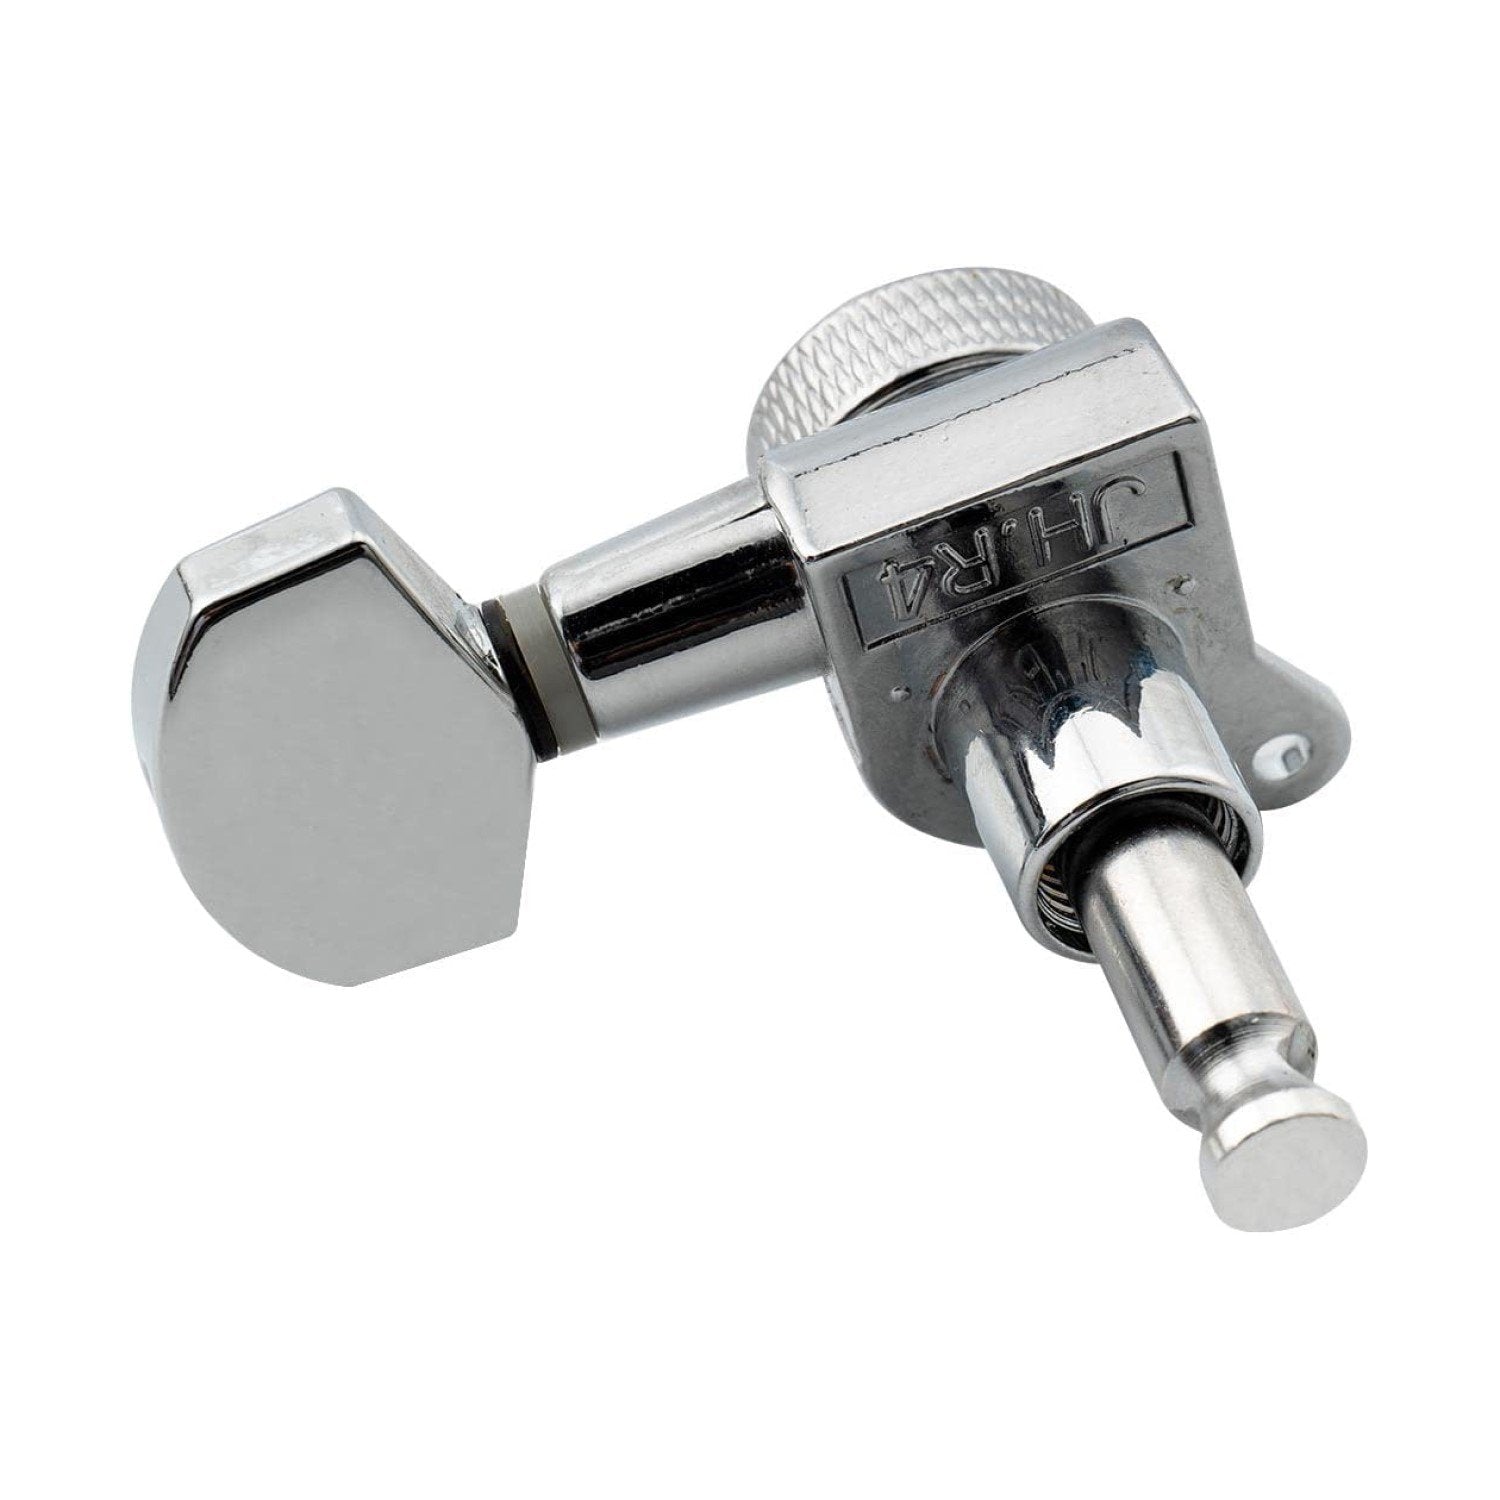 6-in-line Right Hand Locking Guitar Tuning Pegs, Chrome